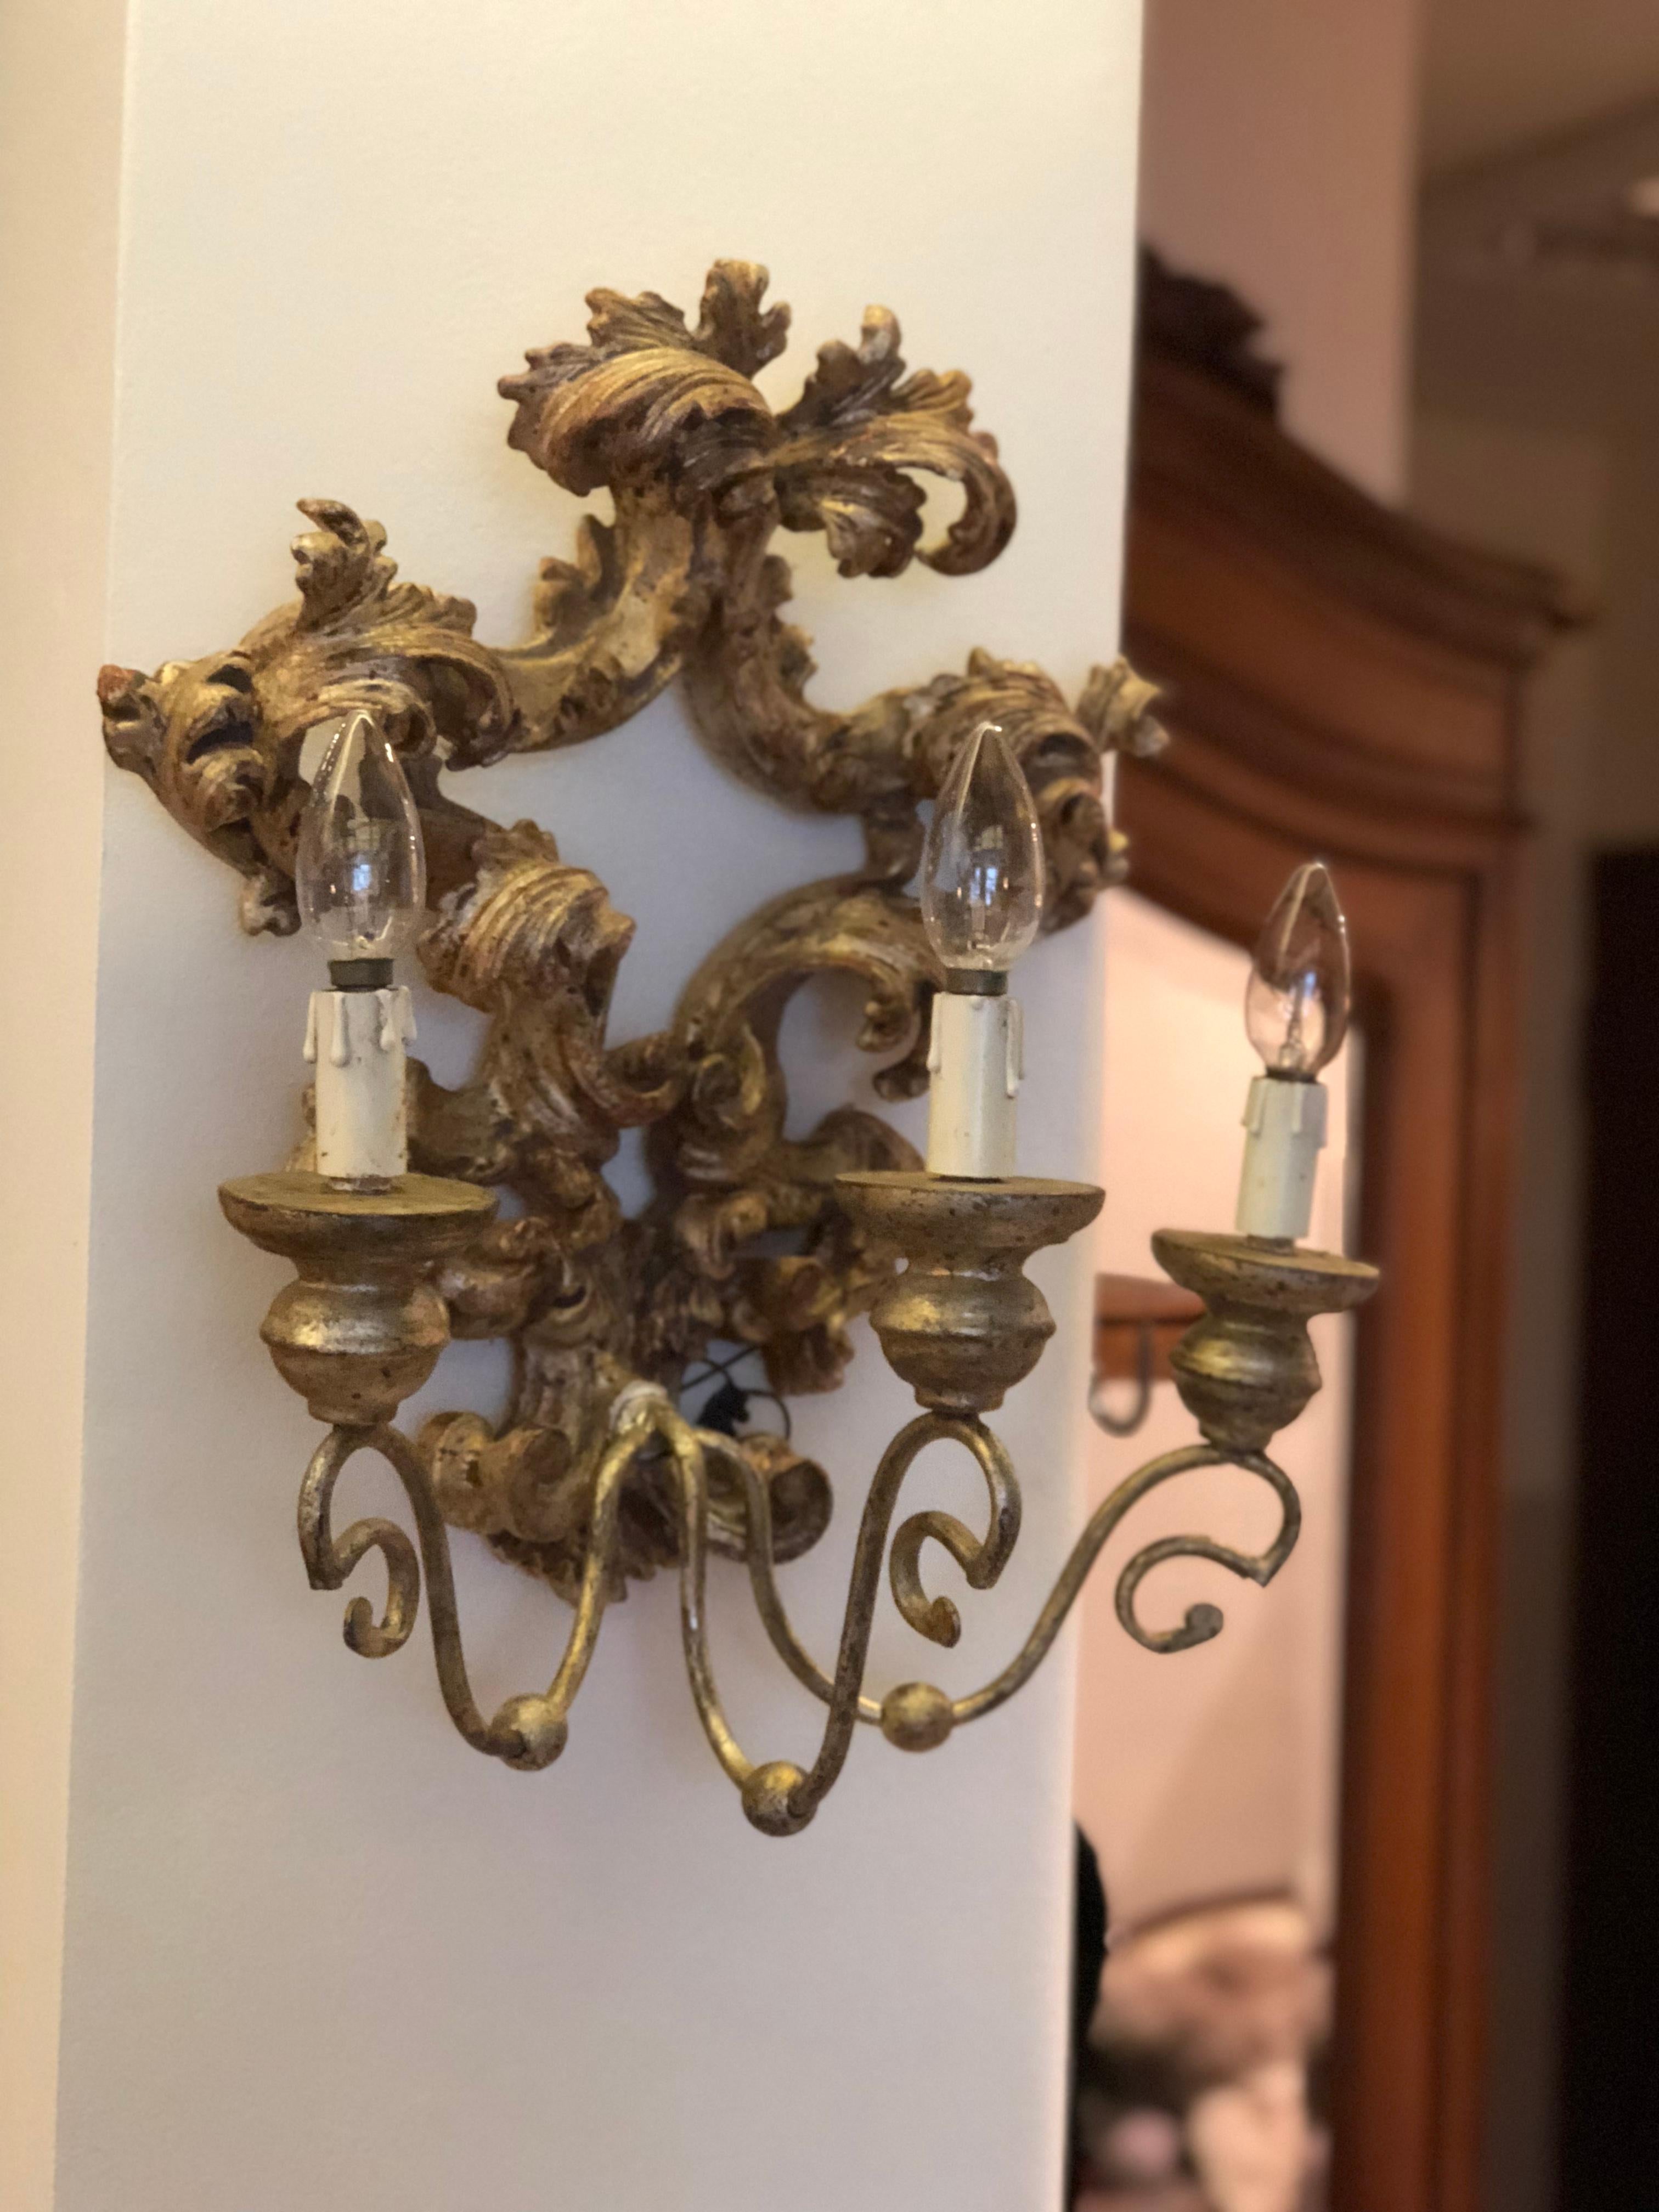 These antique Baroque style hand carved giltwood sconces have wrought iron armatures wired electrically for bulbs with rich leaves decoration.
France, circa 1880.